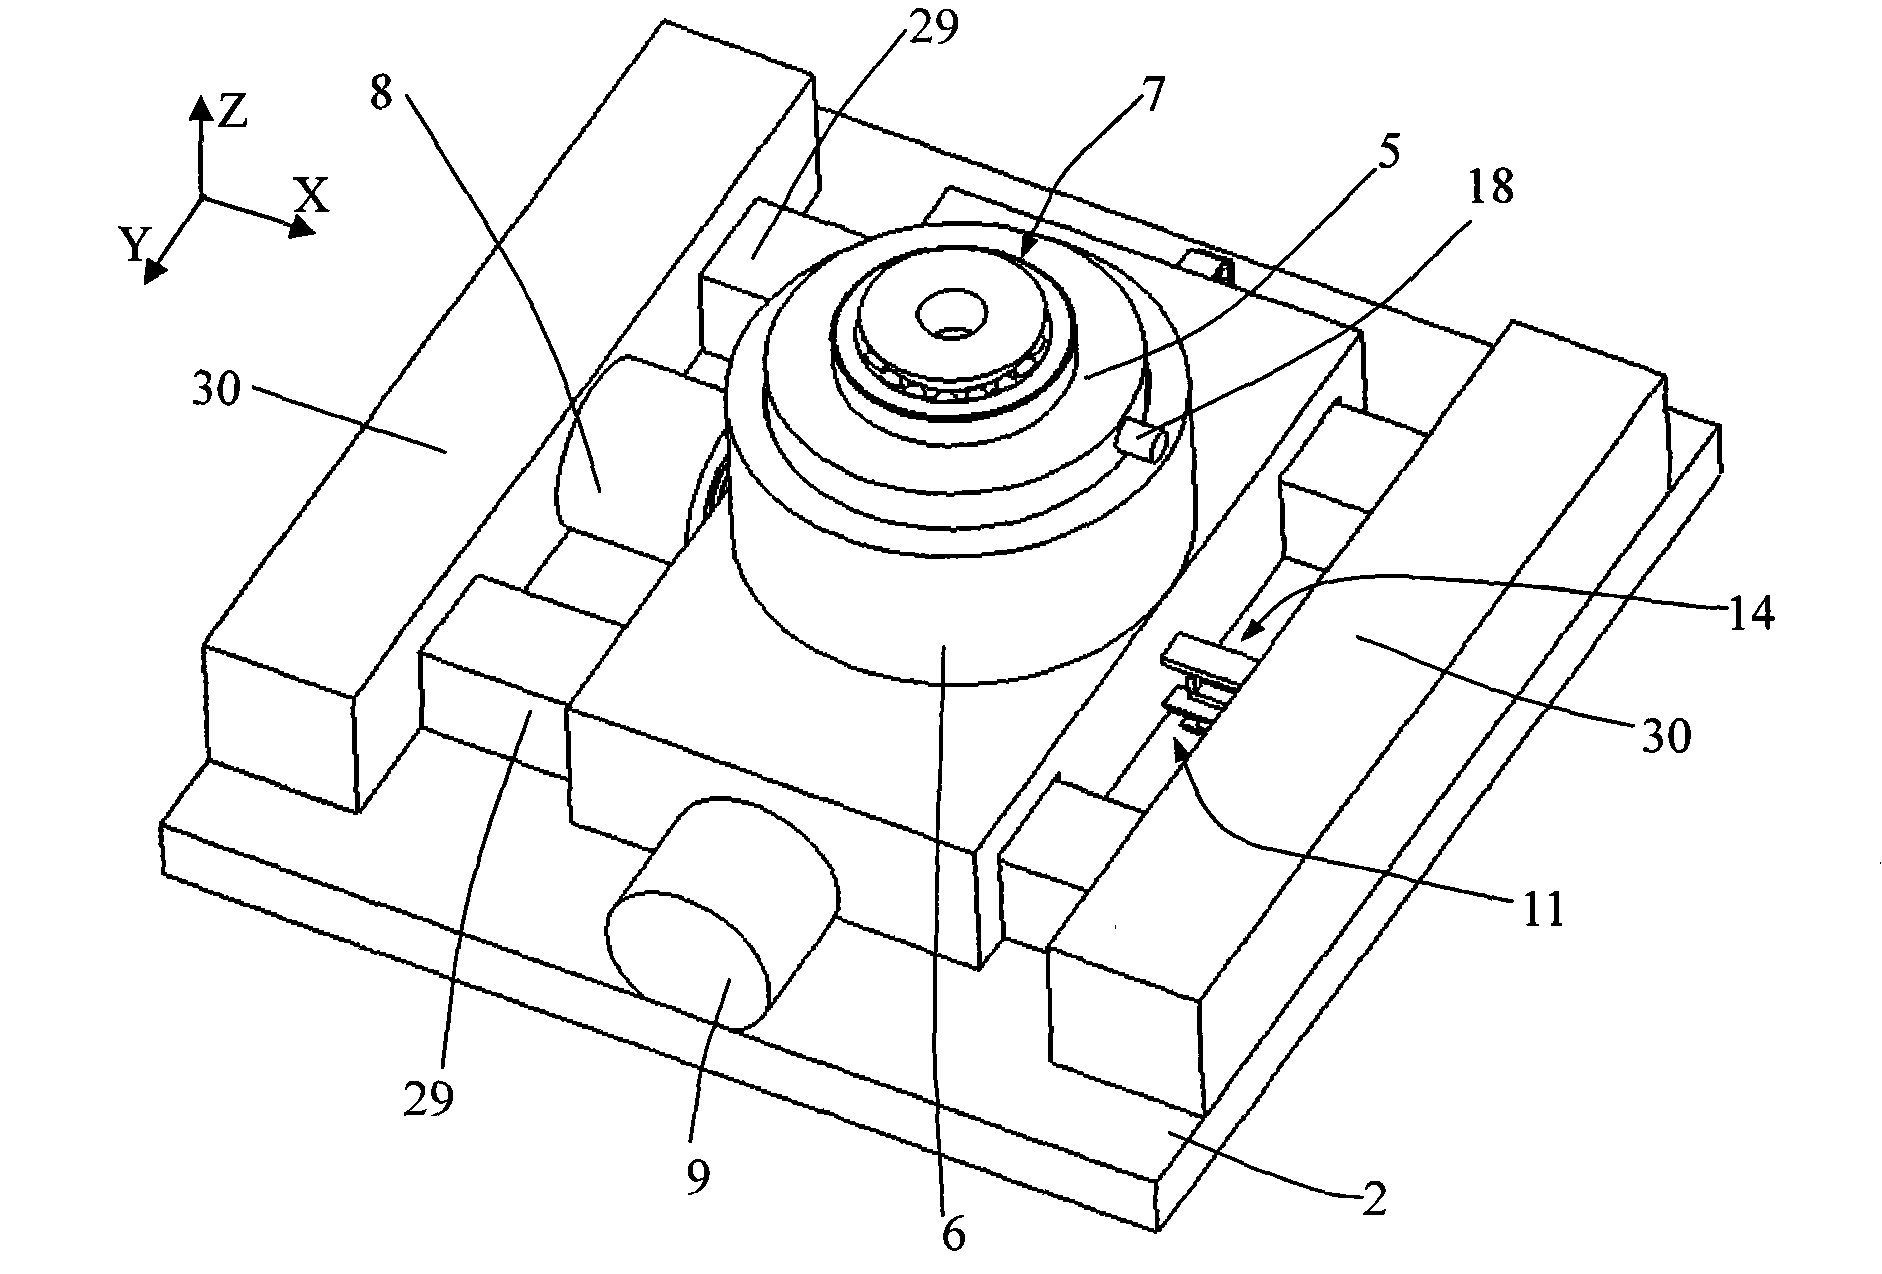 Magnetic levitation vibration isolator with coplace air flotation orthogonal decoupling and rolling knuckle bearing angle decoupling